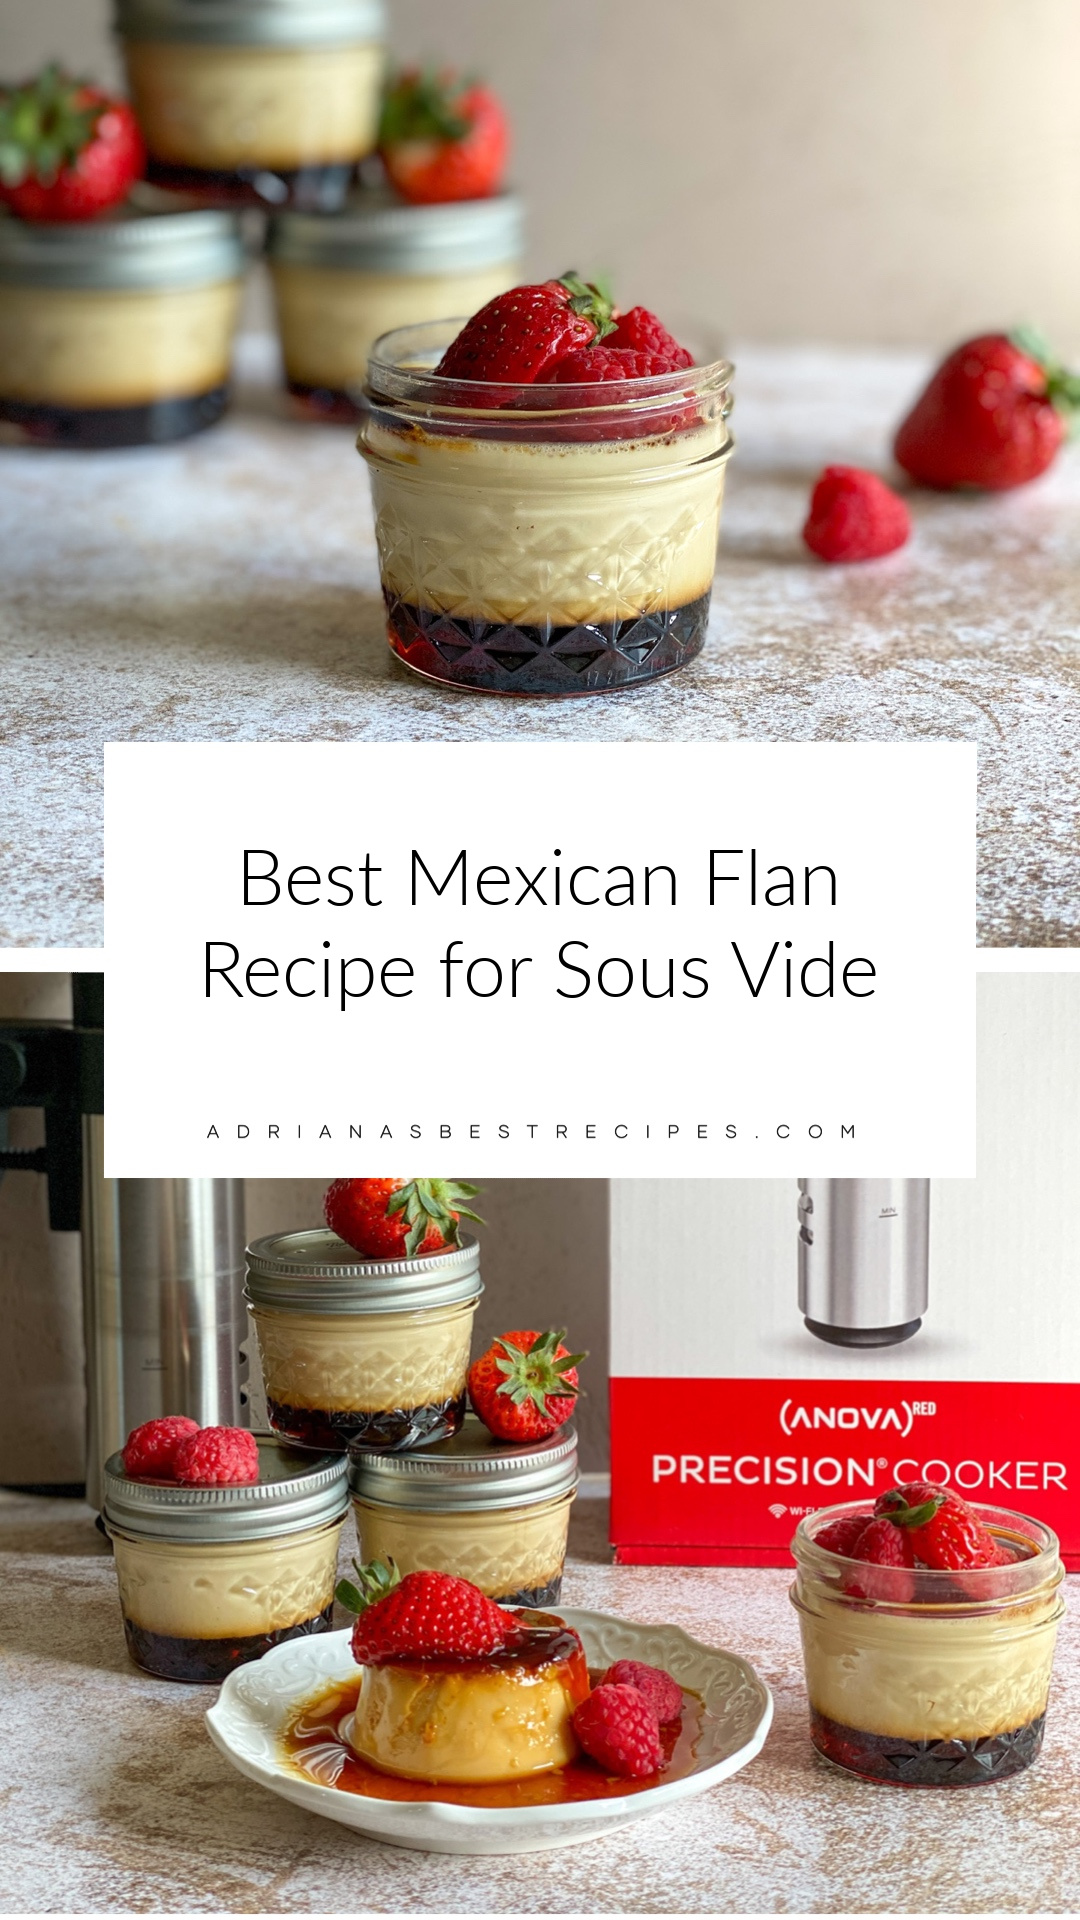 Best Mexican Flan Recipe for Sous Vide or precision cooking includes homemade caramel and fresh berries 